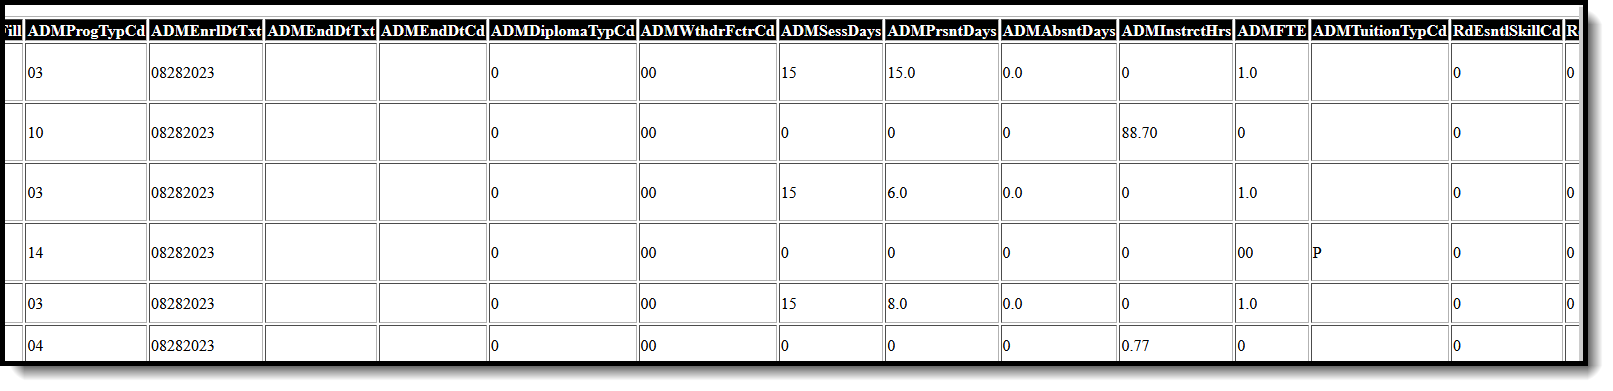 Screenshot of the Cumulative ADM Report in HTML format starting with the ADM Program Type Code field.